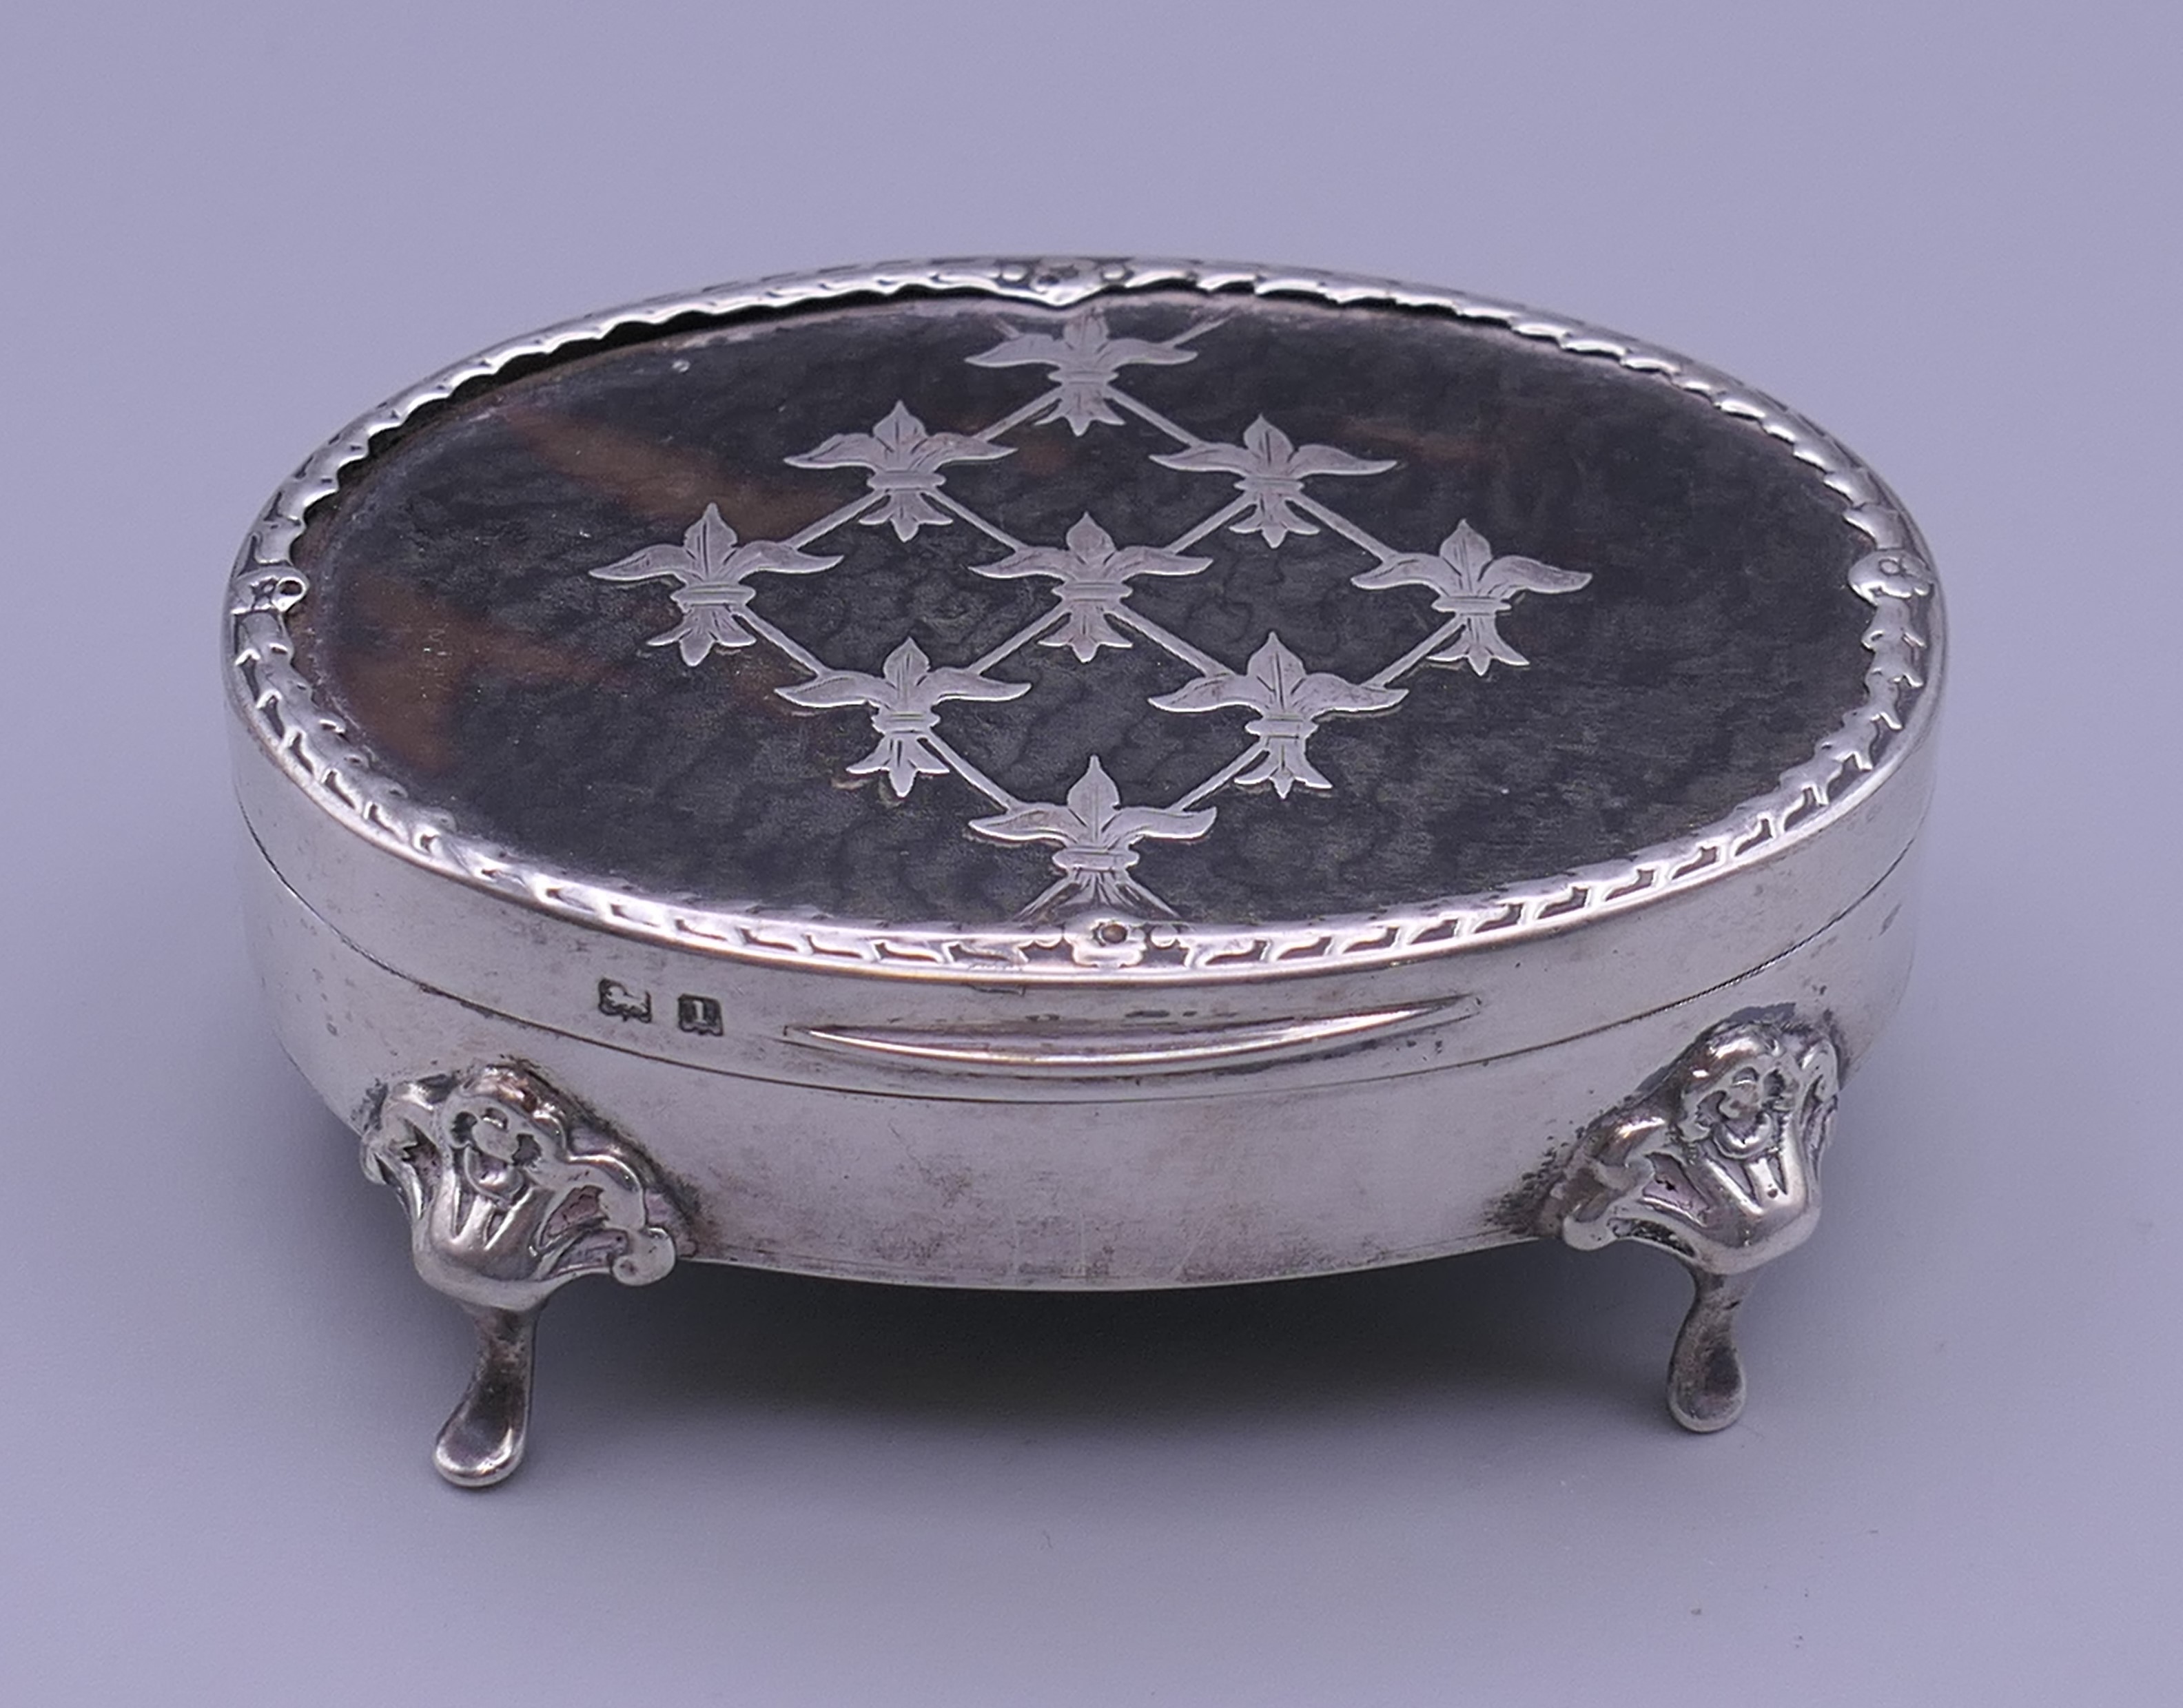 A silver and tortoiseshell casket. 8 cm wide, 3.25 cm high. 71.5 grammes total weight.